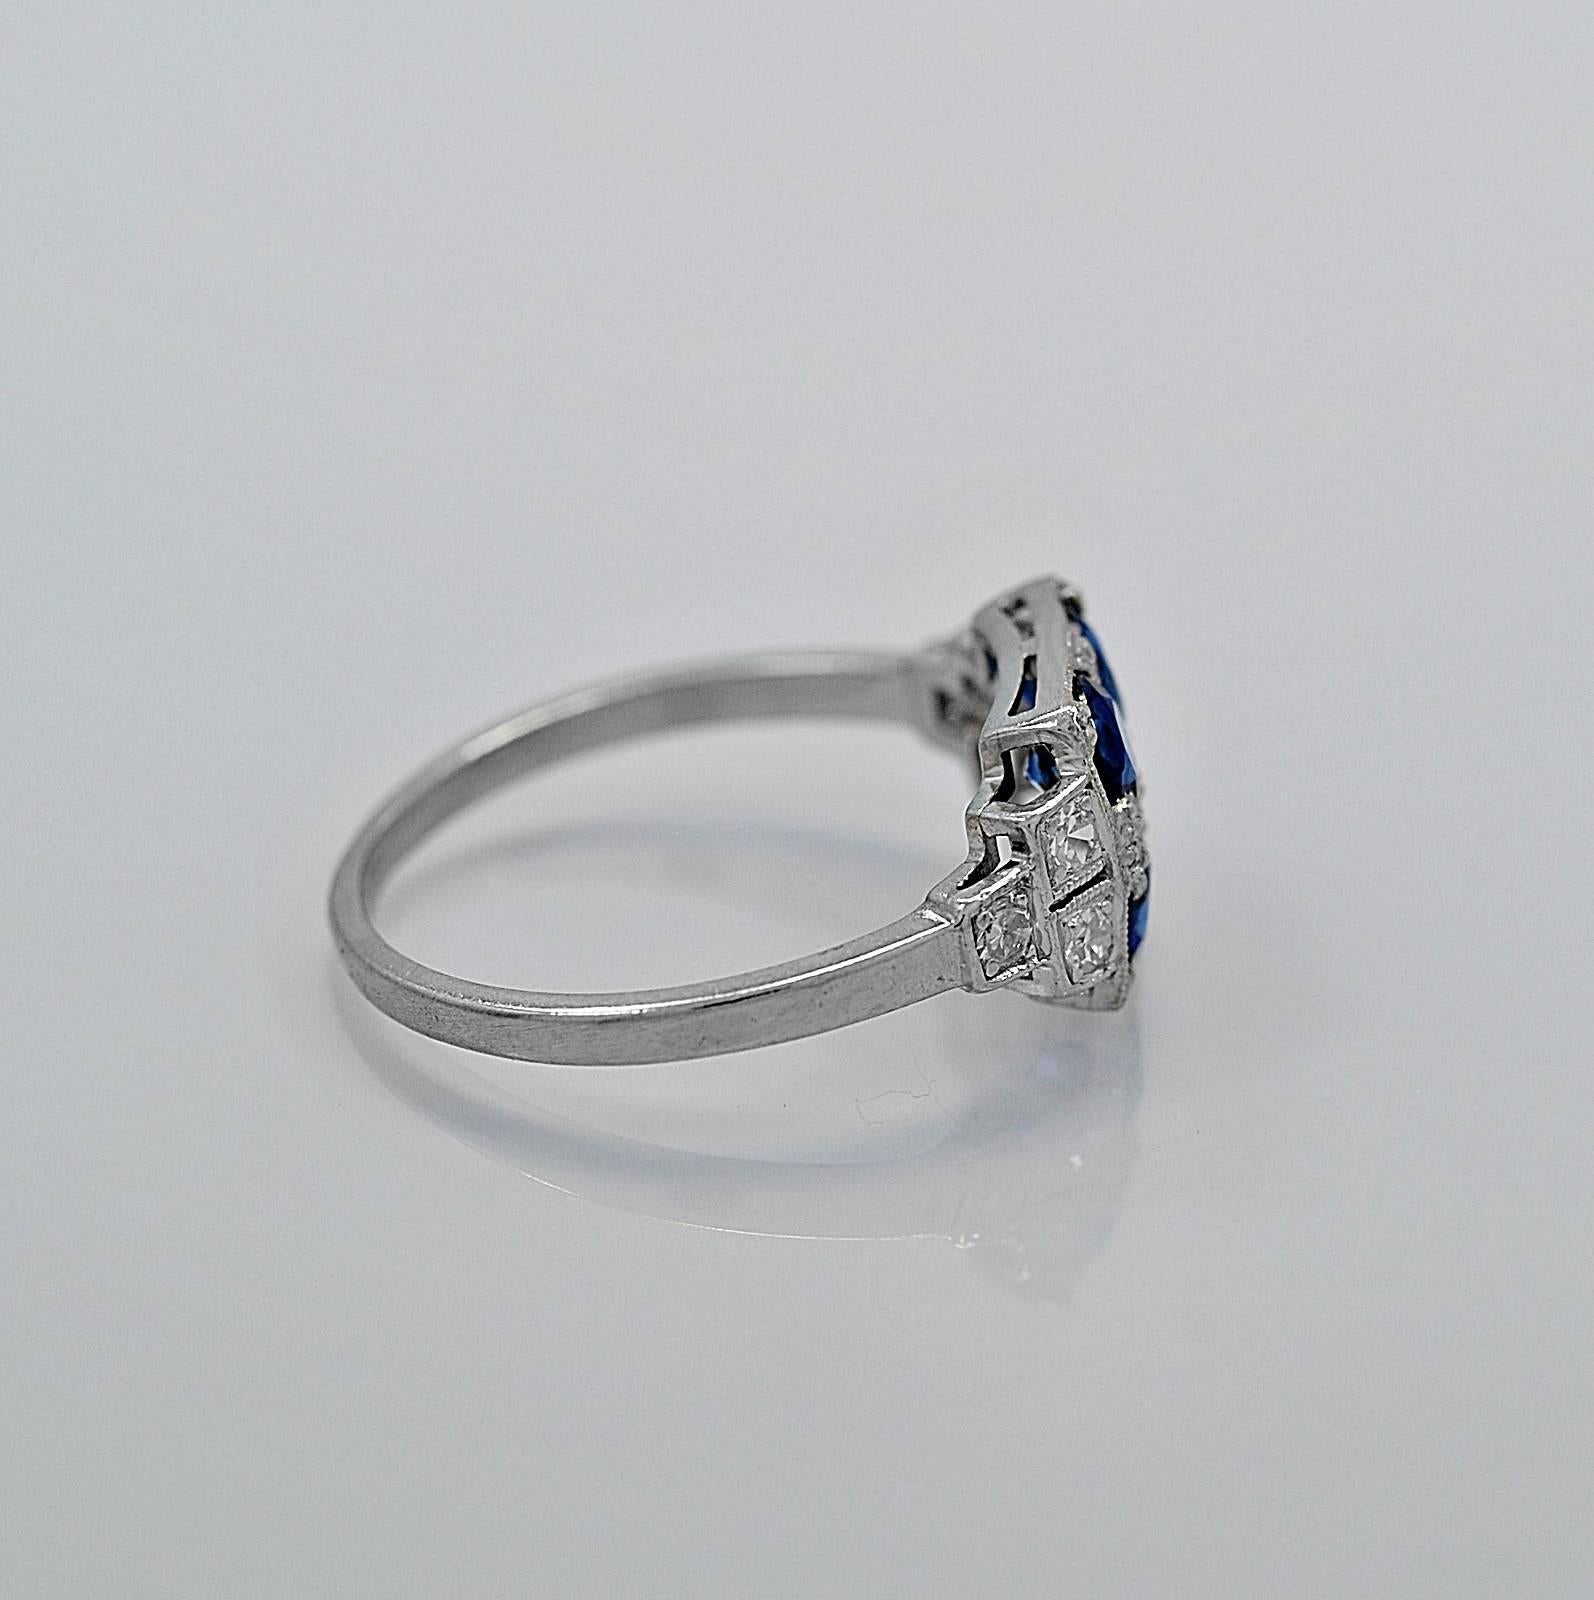 A uniquely designed antique engagement ring or fashion ring featuring 4 rich blue sapphires that weigh 1.25ct. apx. T.W. set into a square and decorated head with diamonds and milgrain. Additionally, there are 3 diamonds on each side, east to west,